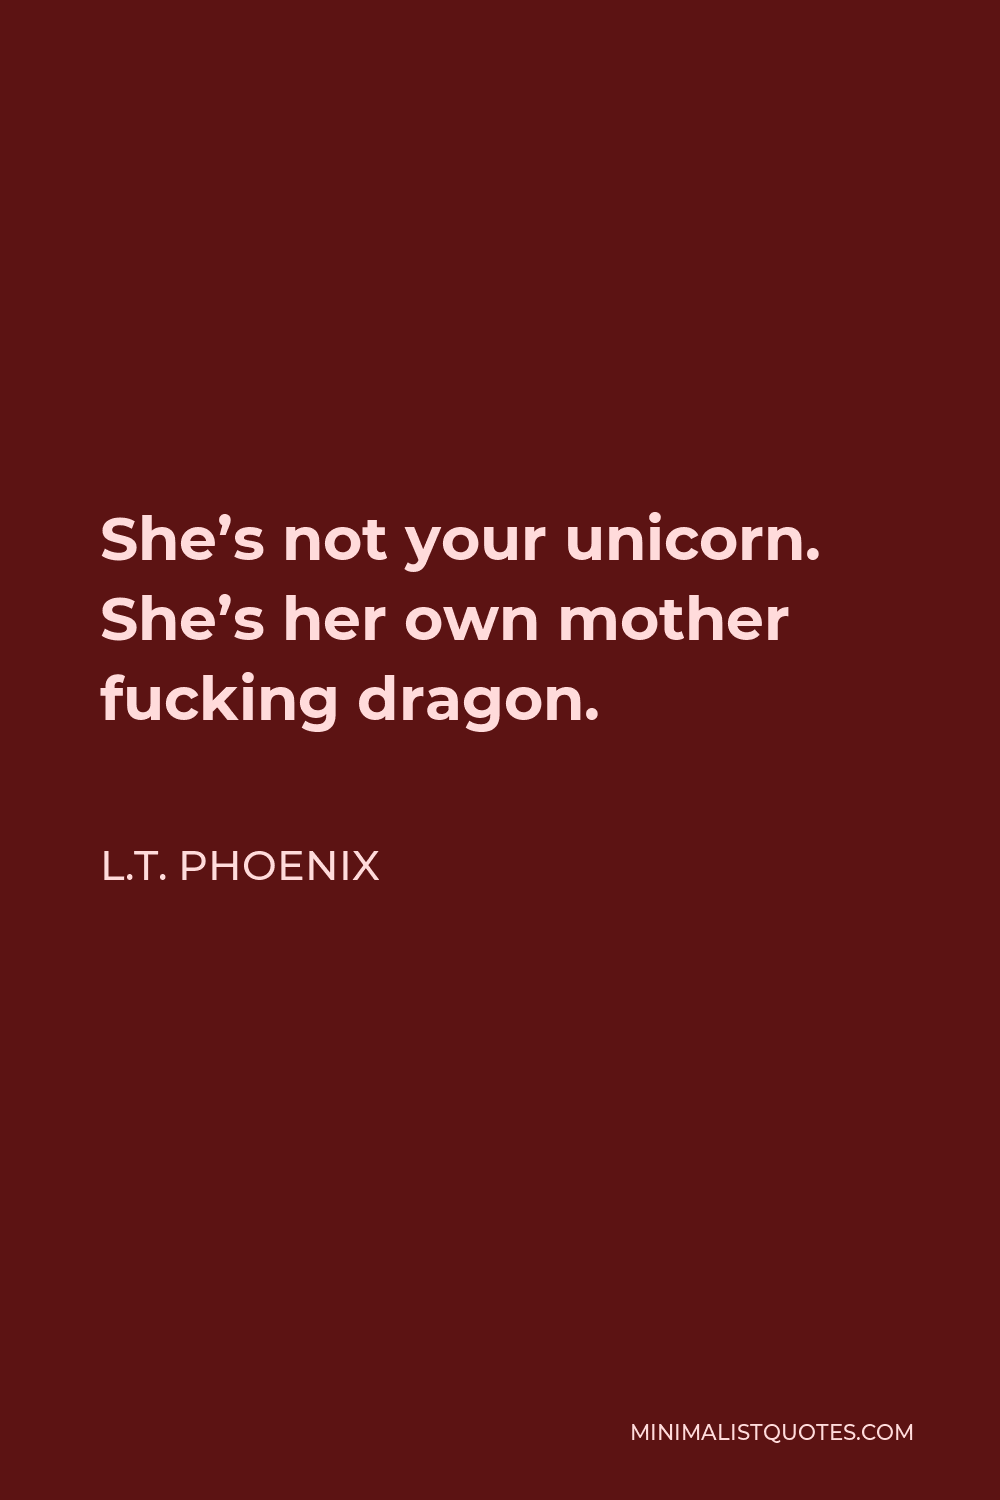 L.T. Phoenix Quote - She’s not your unicorn. She’s her own mother fucking dragon.